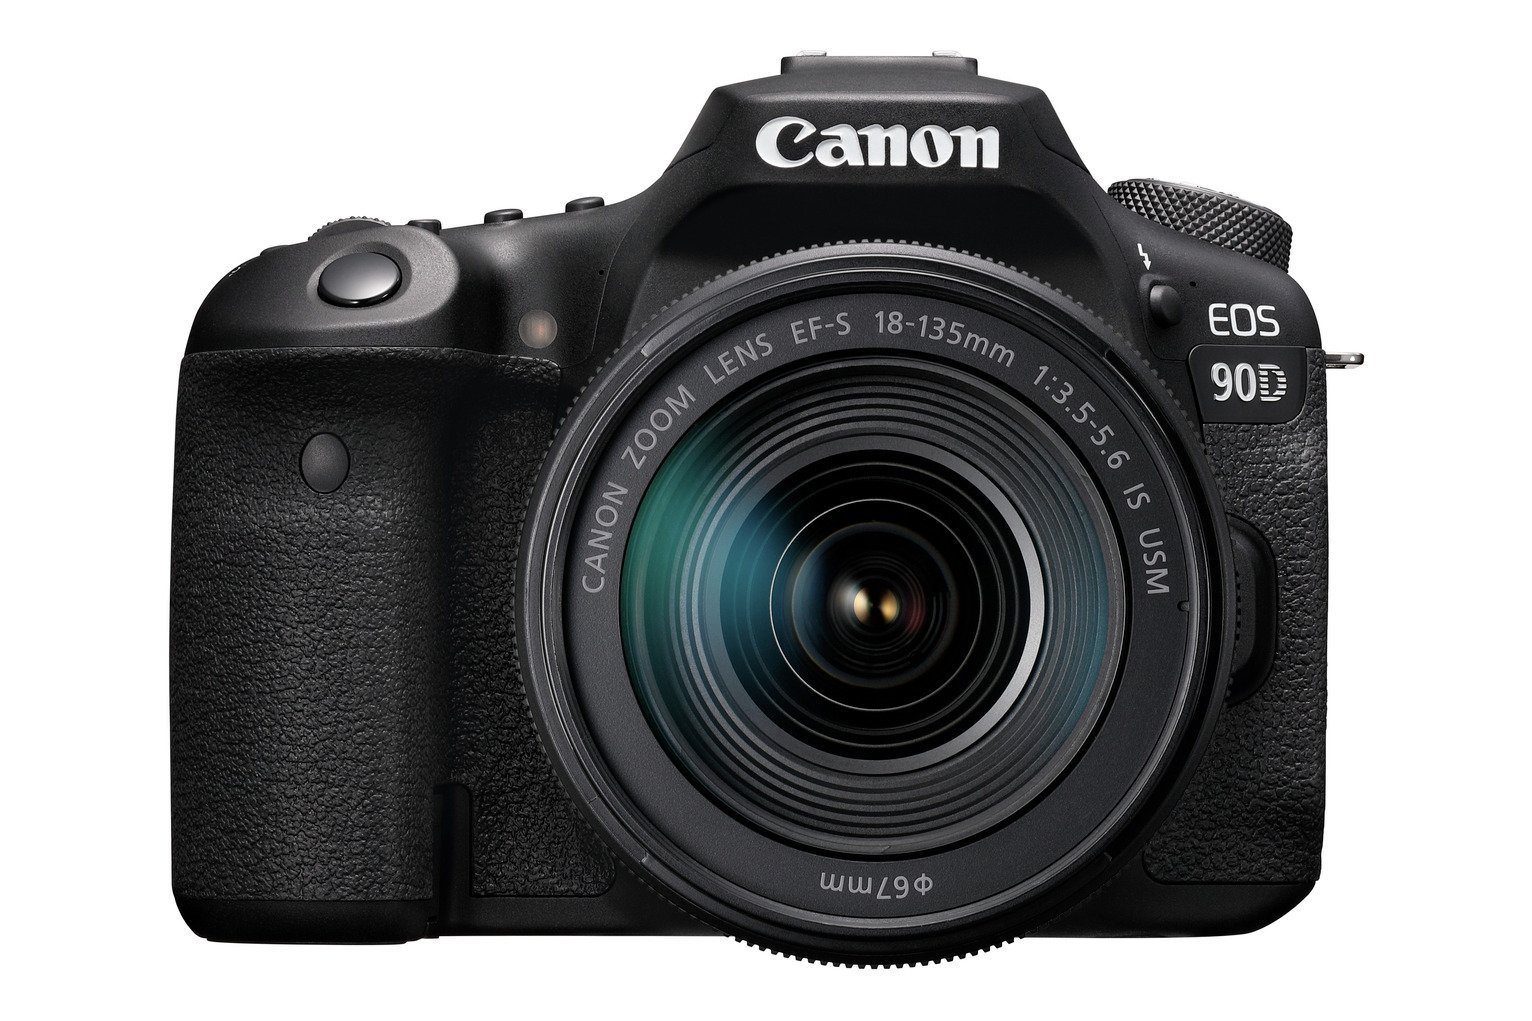 Canon EOS 90D DSLR Camera Body with 18-135mm Lens